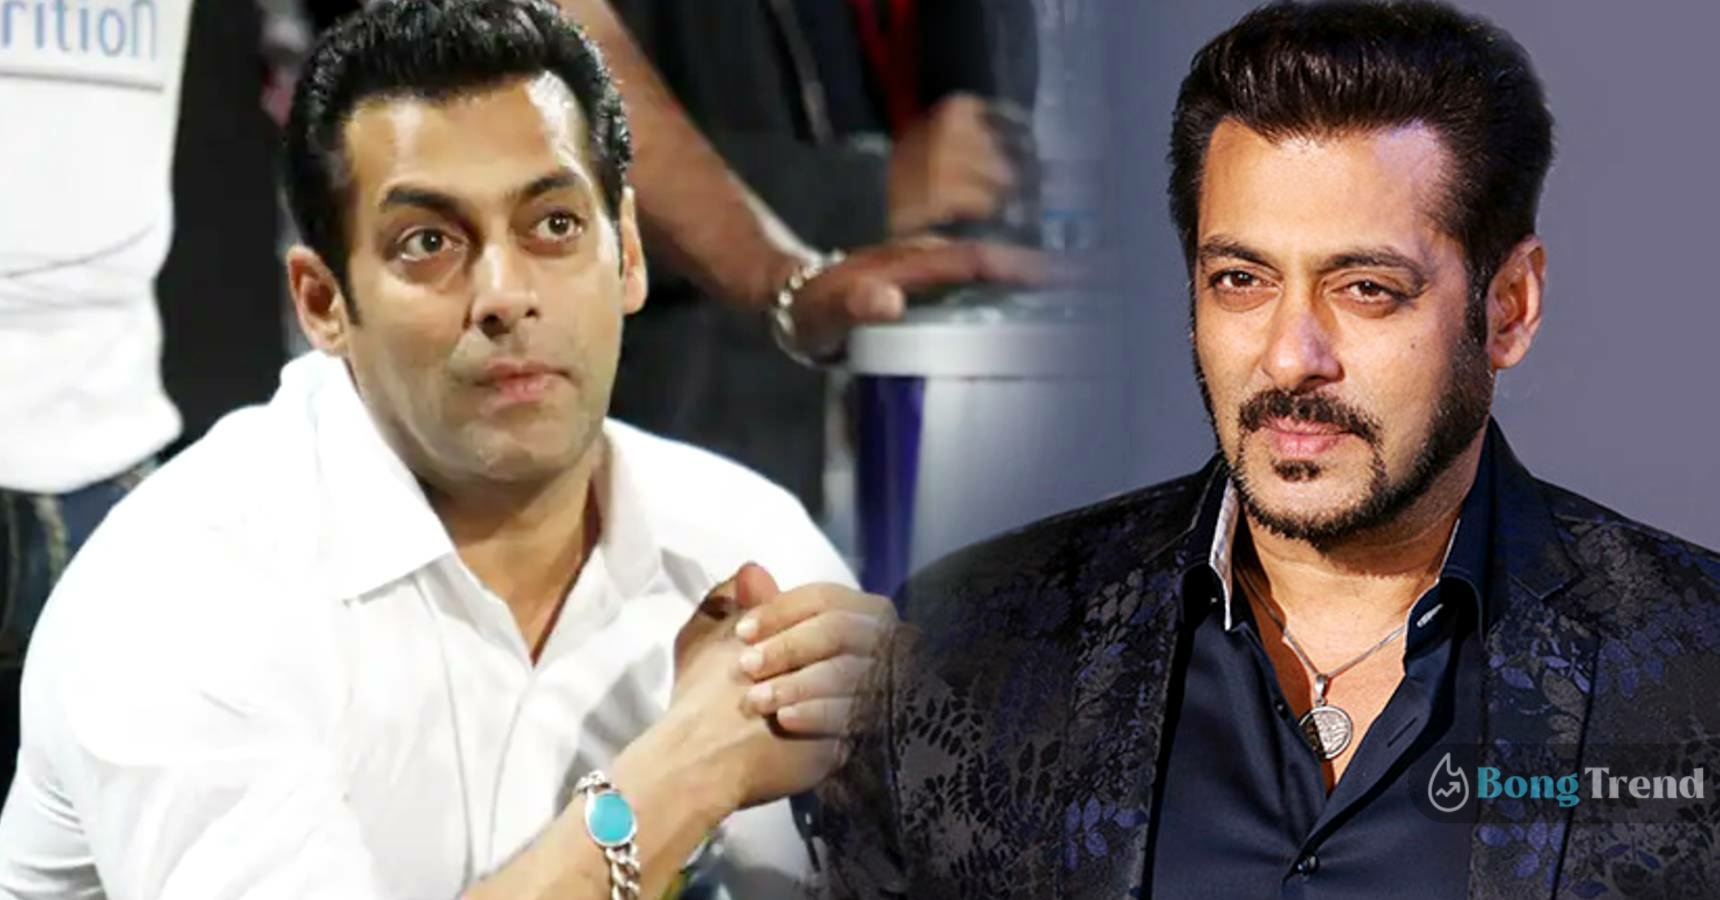 All you need to know about Salman Khan’s life and controversy